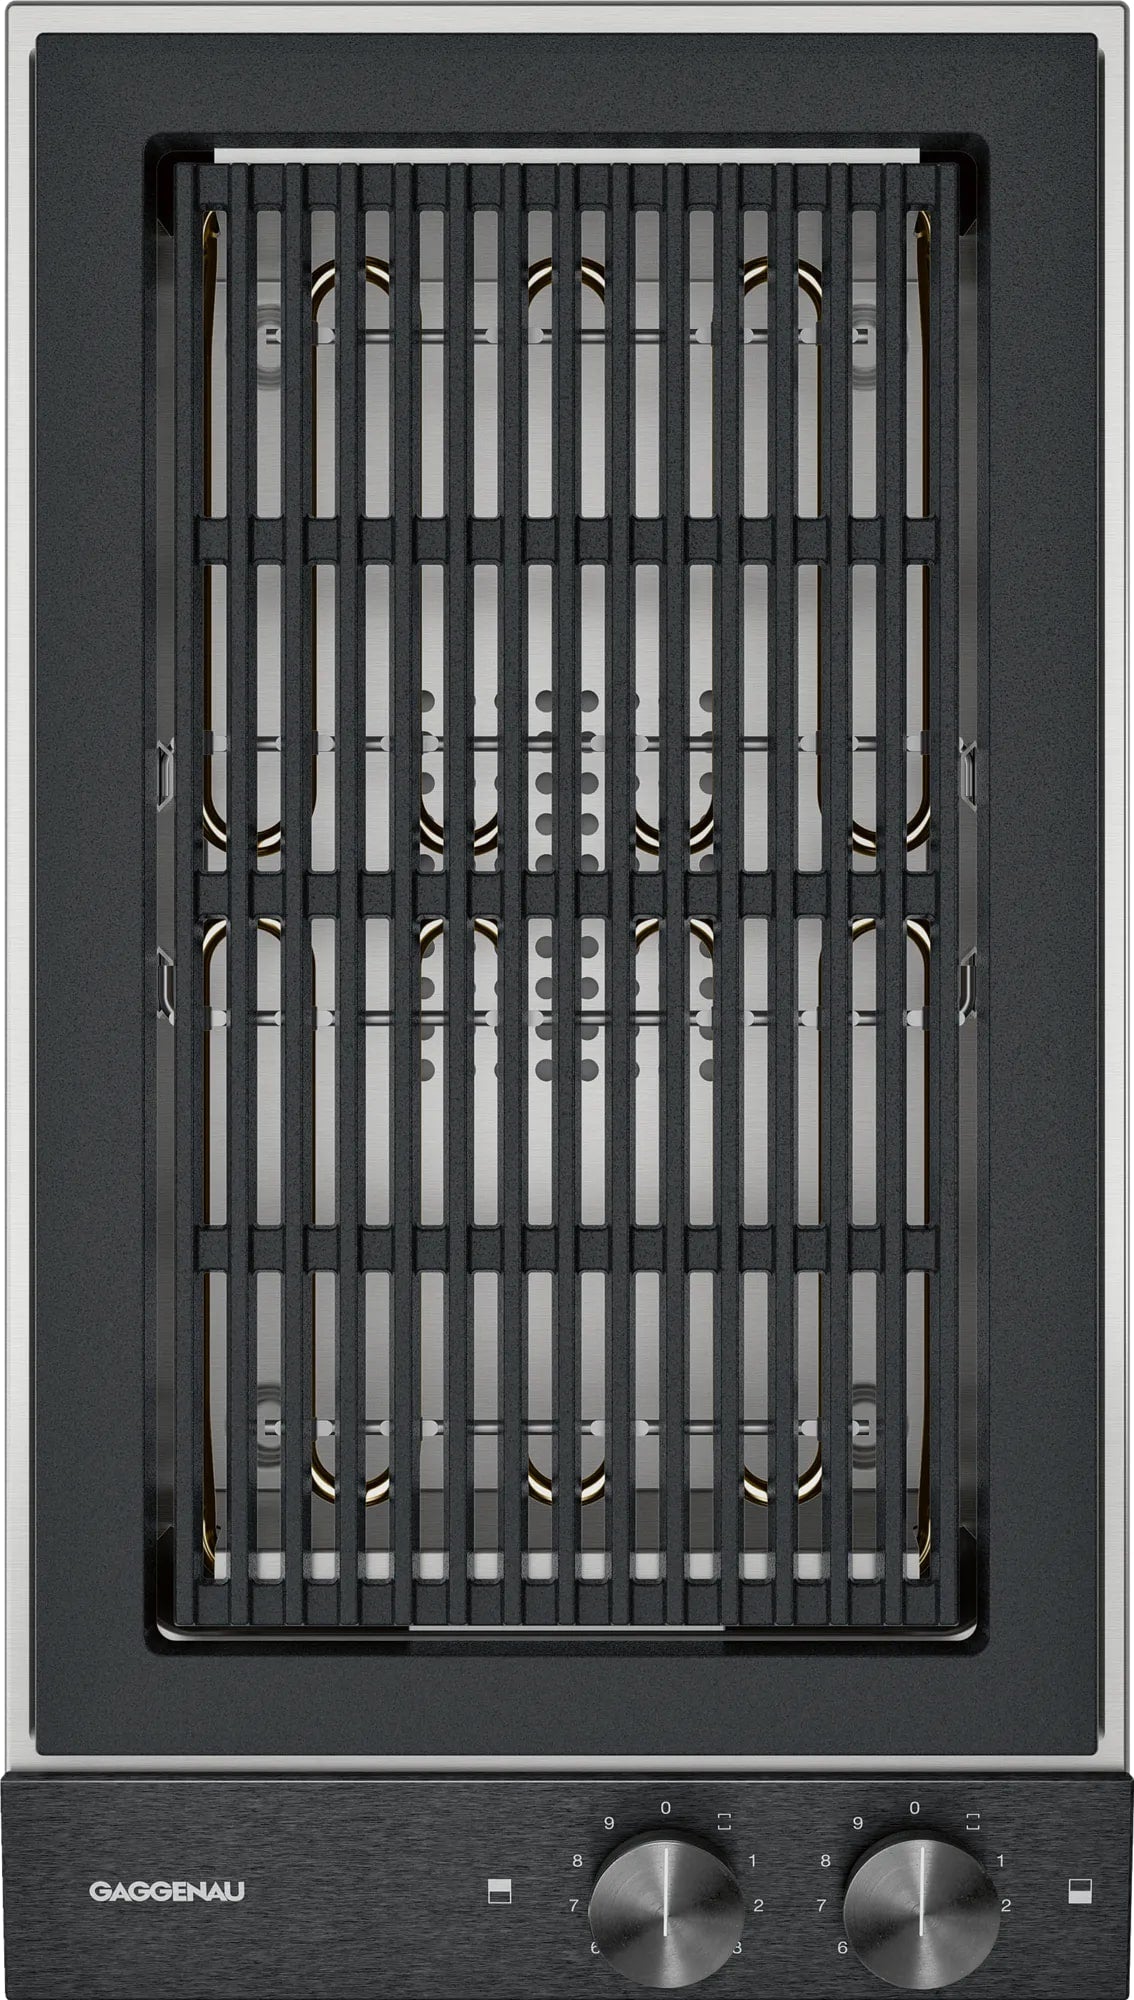 Gaggenau - 11.3125 inch wide Electric Grill in Stainless - VR230620